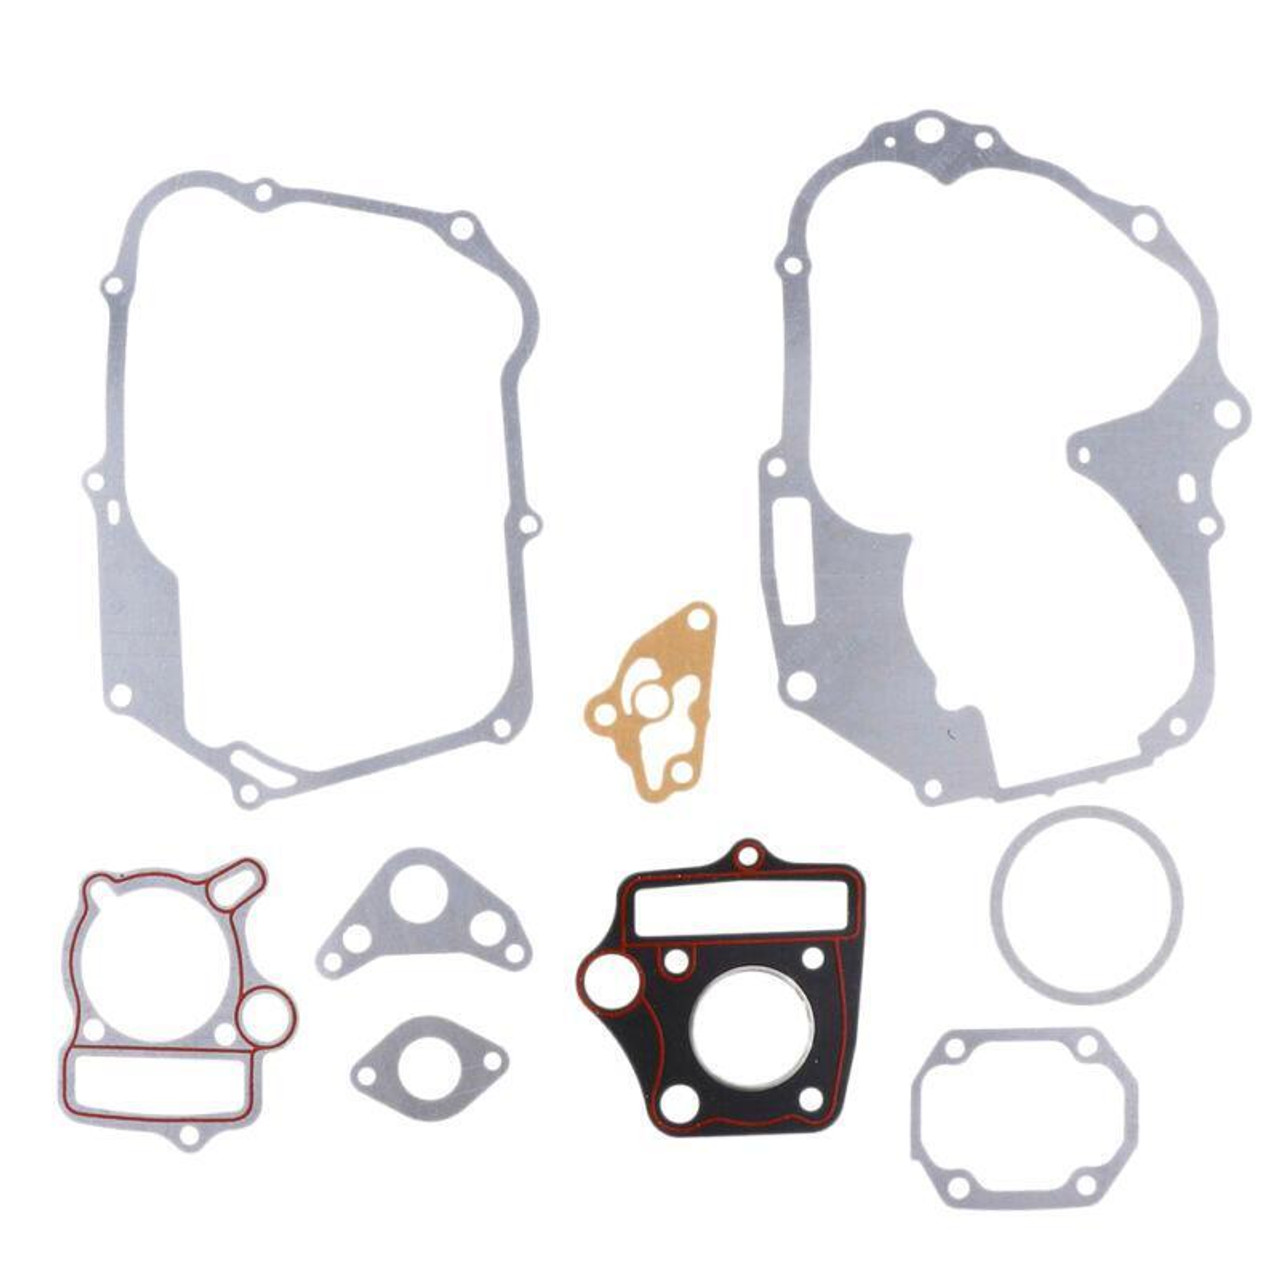 50cc *39mm BORE* GASKET KIT FOR CHINESE ATV DIRT BIKES WITH E22 CLONE MOTORS